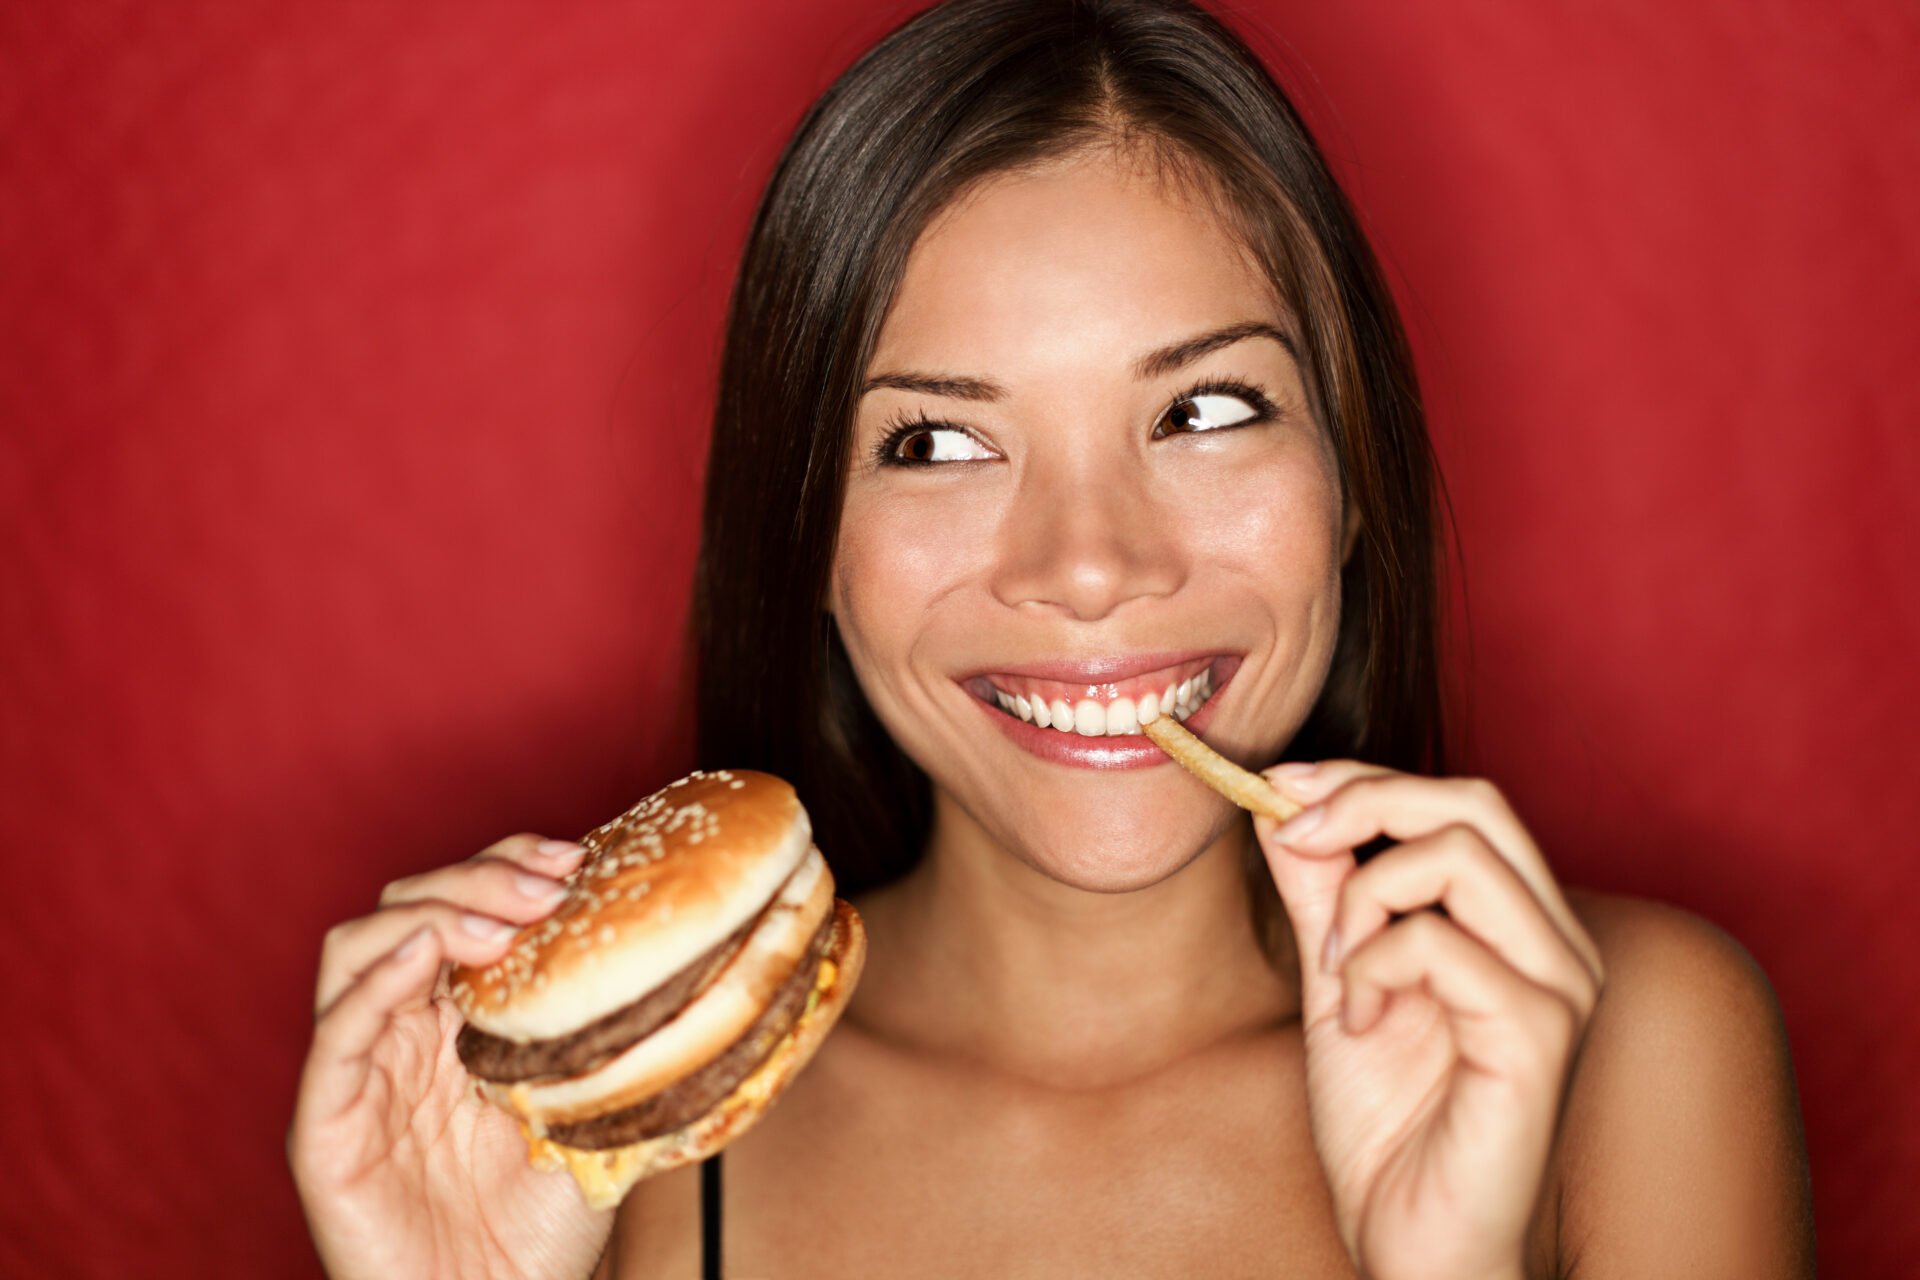 Woman eating burger and fries smiling. Beautiful mixed race asian caucasian female model on red background.